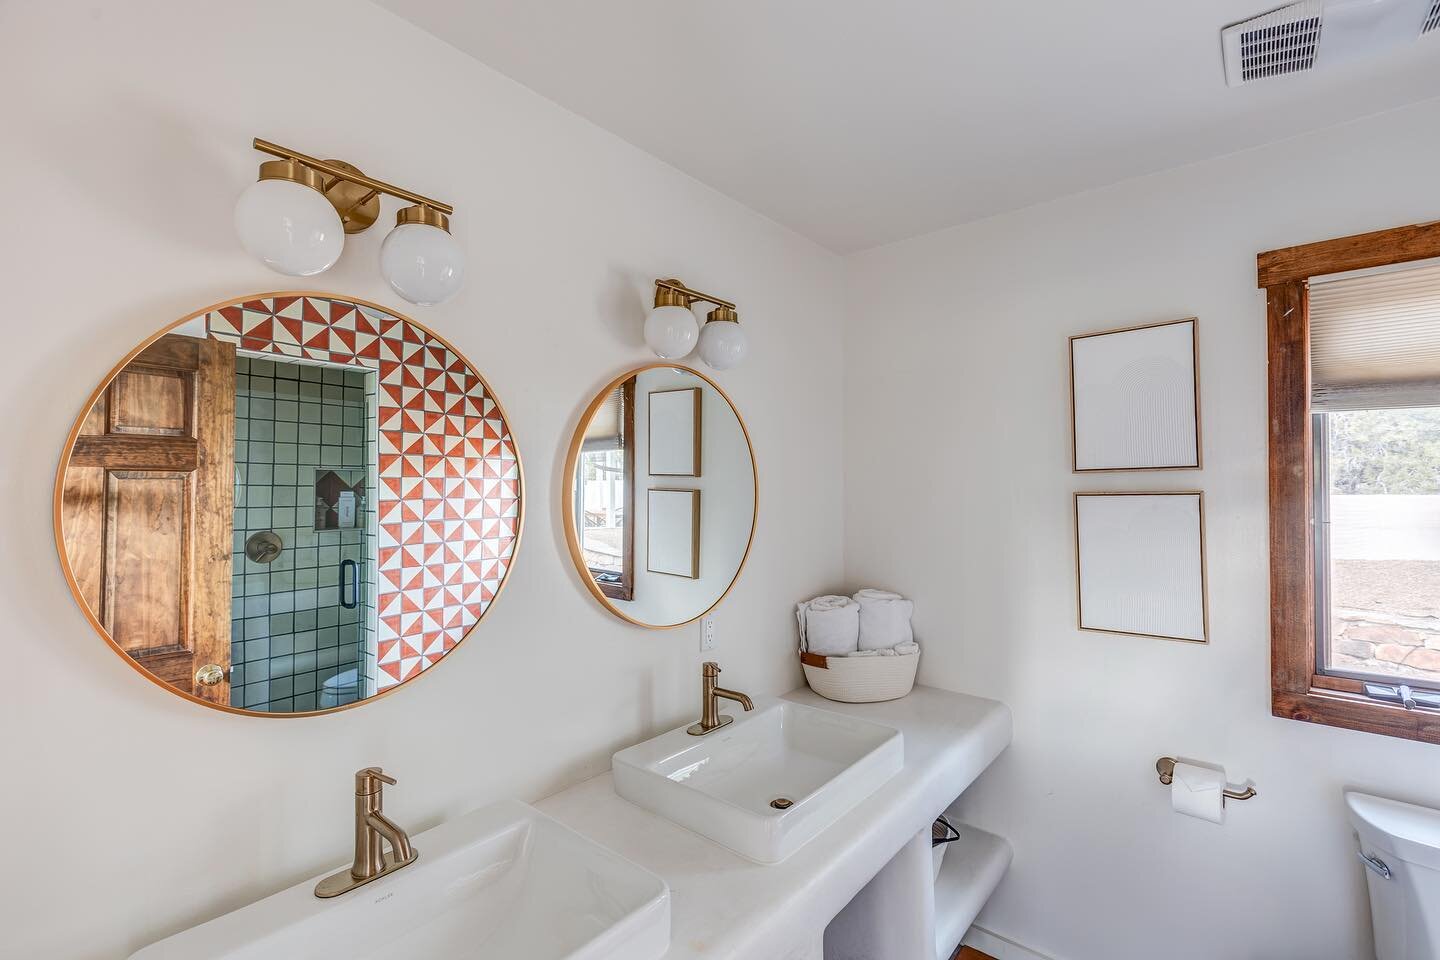 While renovating, it was 
important to us to infuse the spirit of the Southwest while making each space more modern. This bathroom has hand painted talavera tiles and a custom plaster vanity with Delta faucets.

#santafe #newmexico #adobe #boho #adob